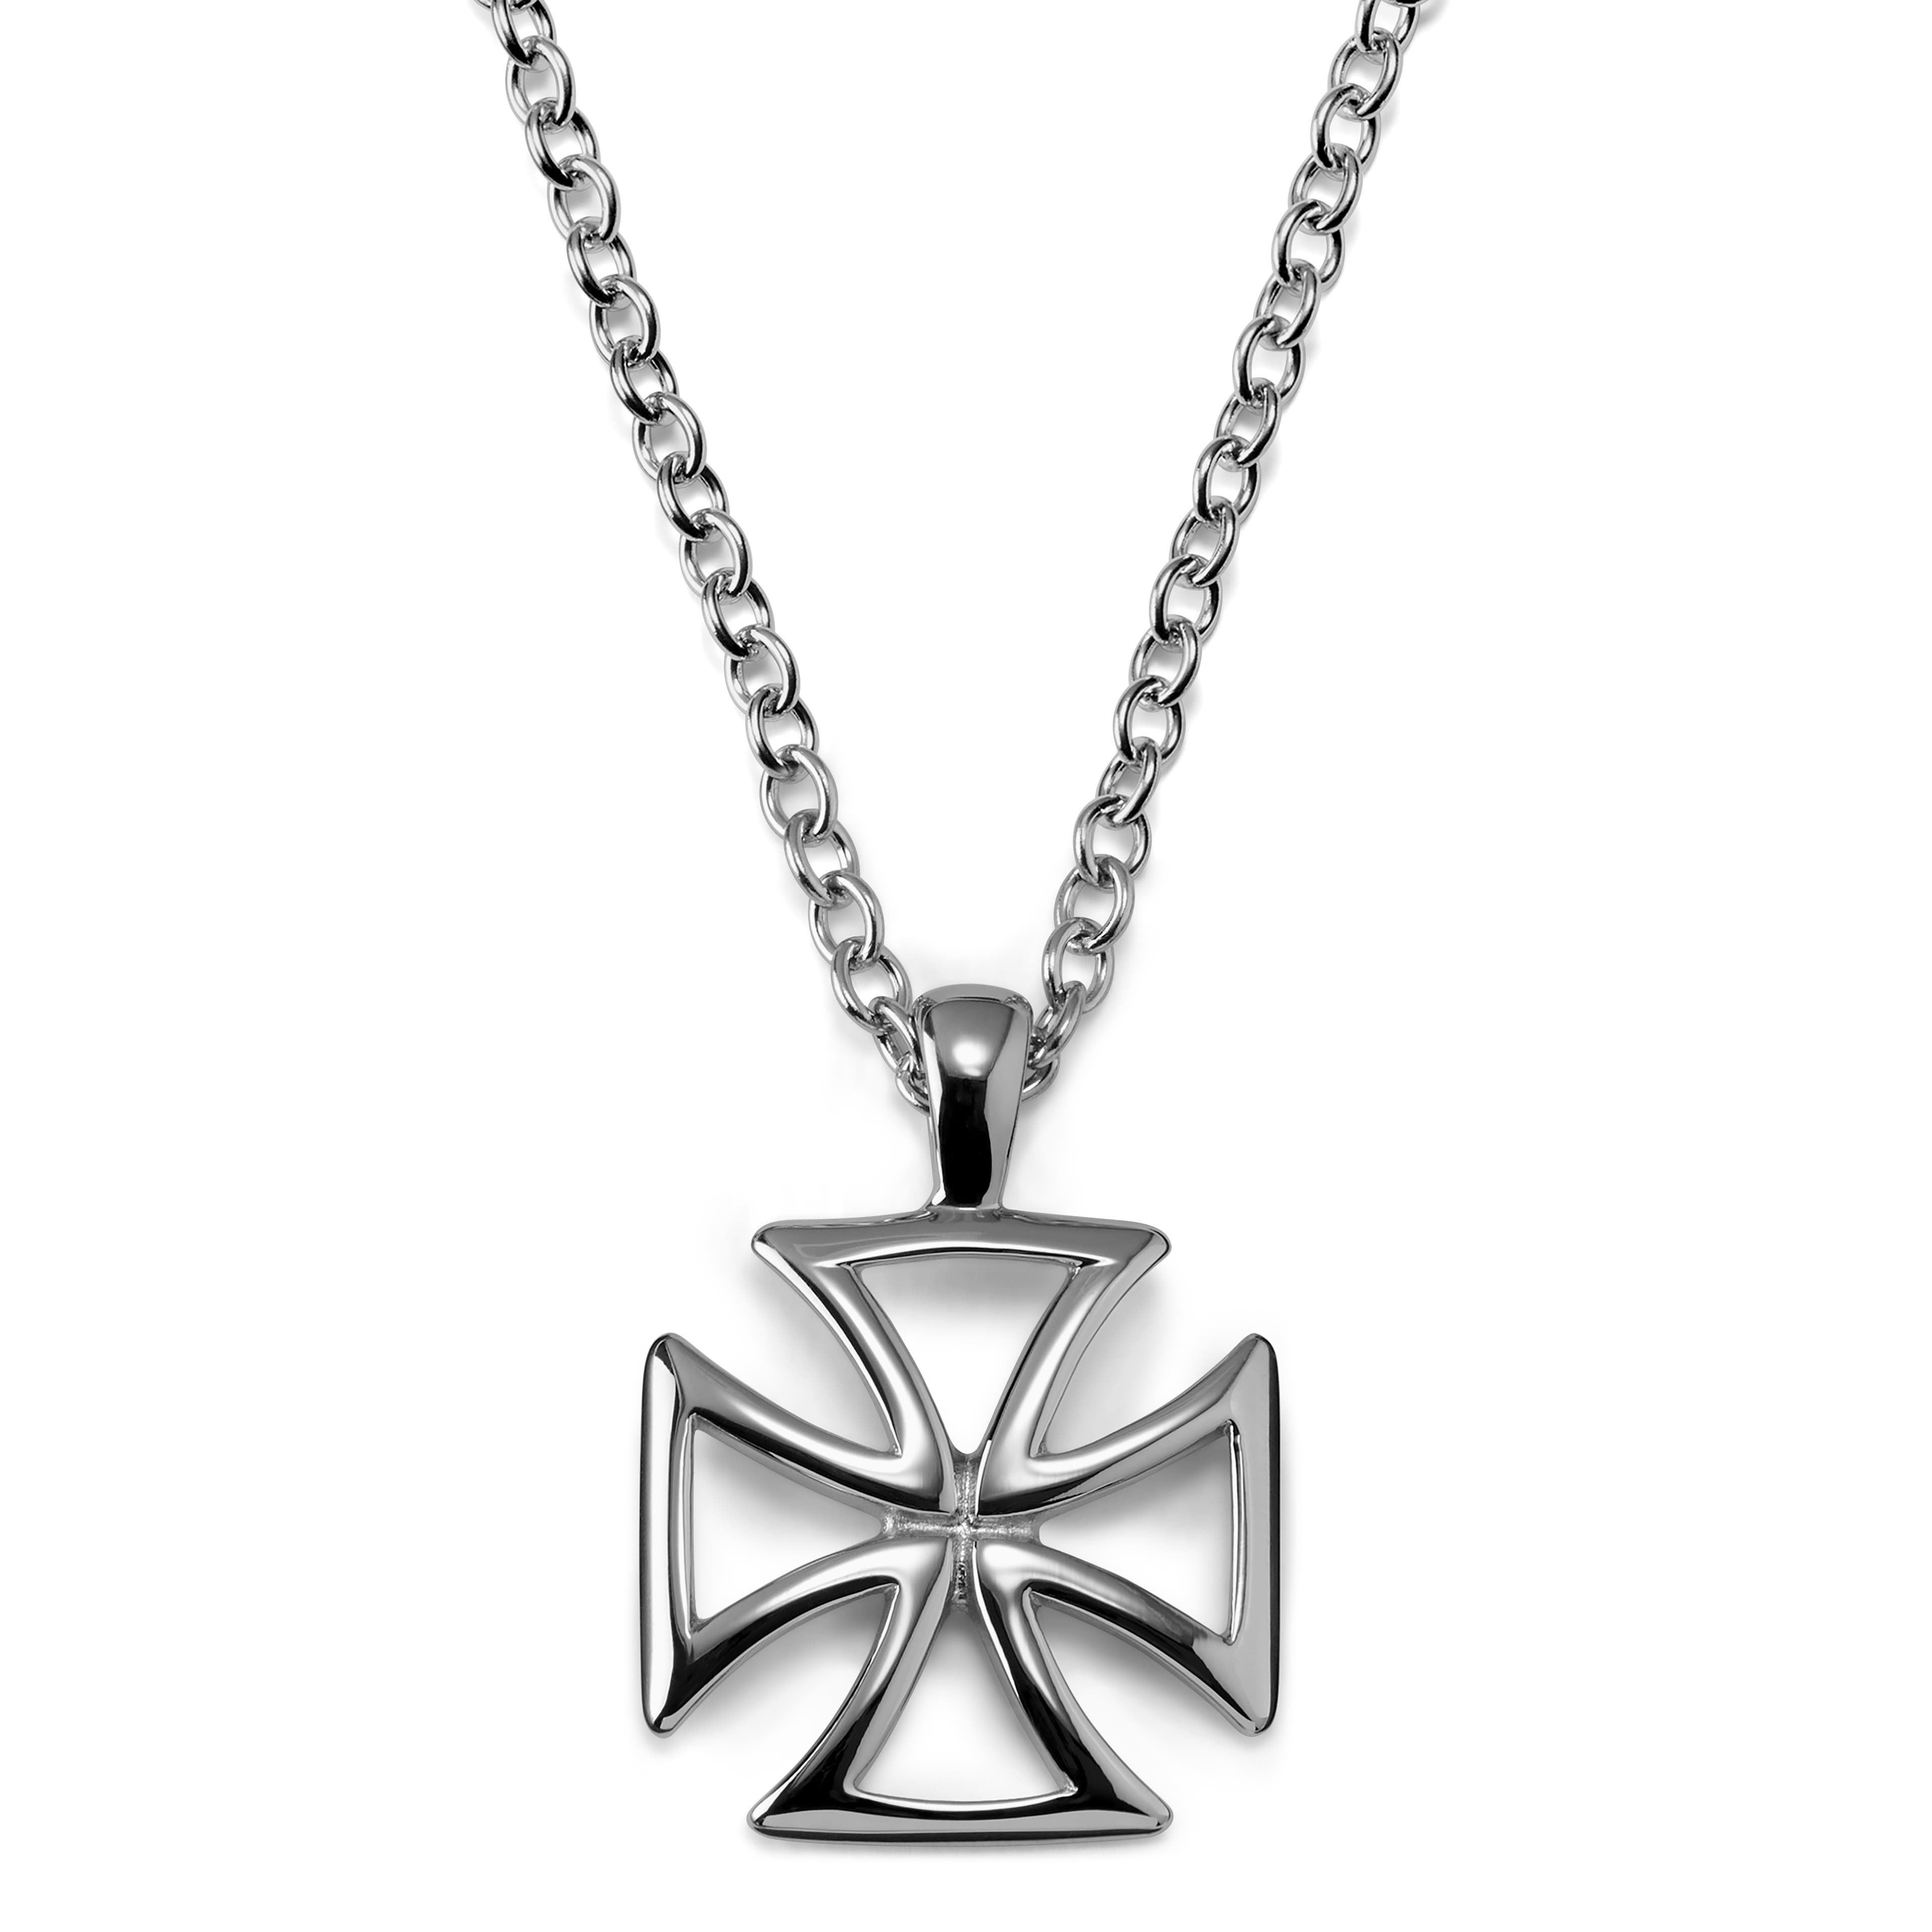 Silver-Tone Stainless Steel Templar Cross Cable Chain Necklace